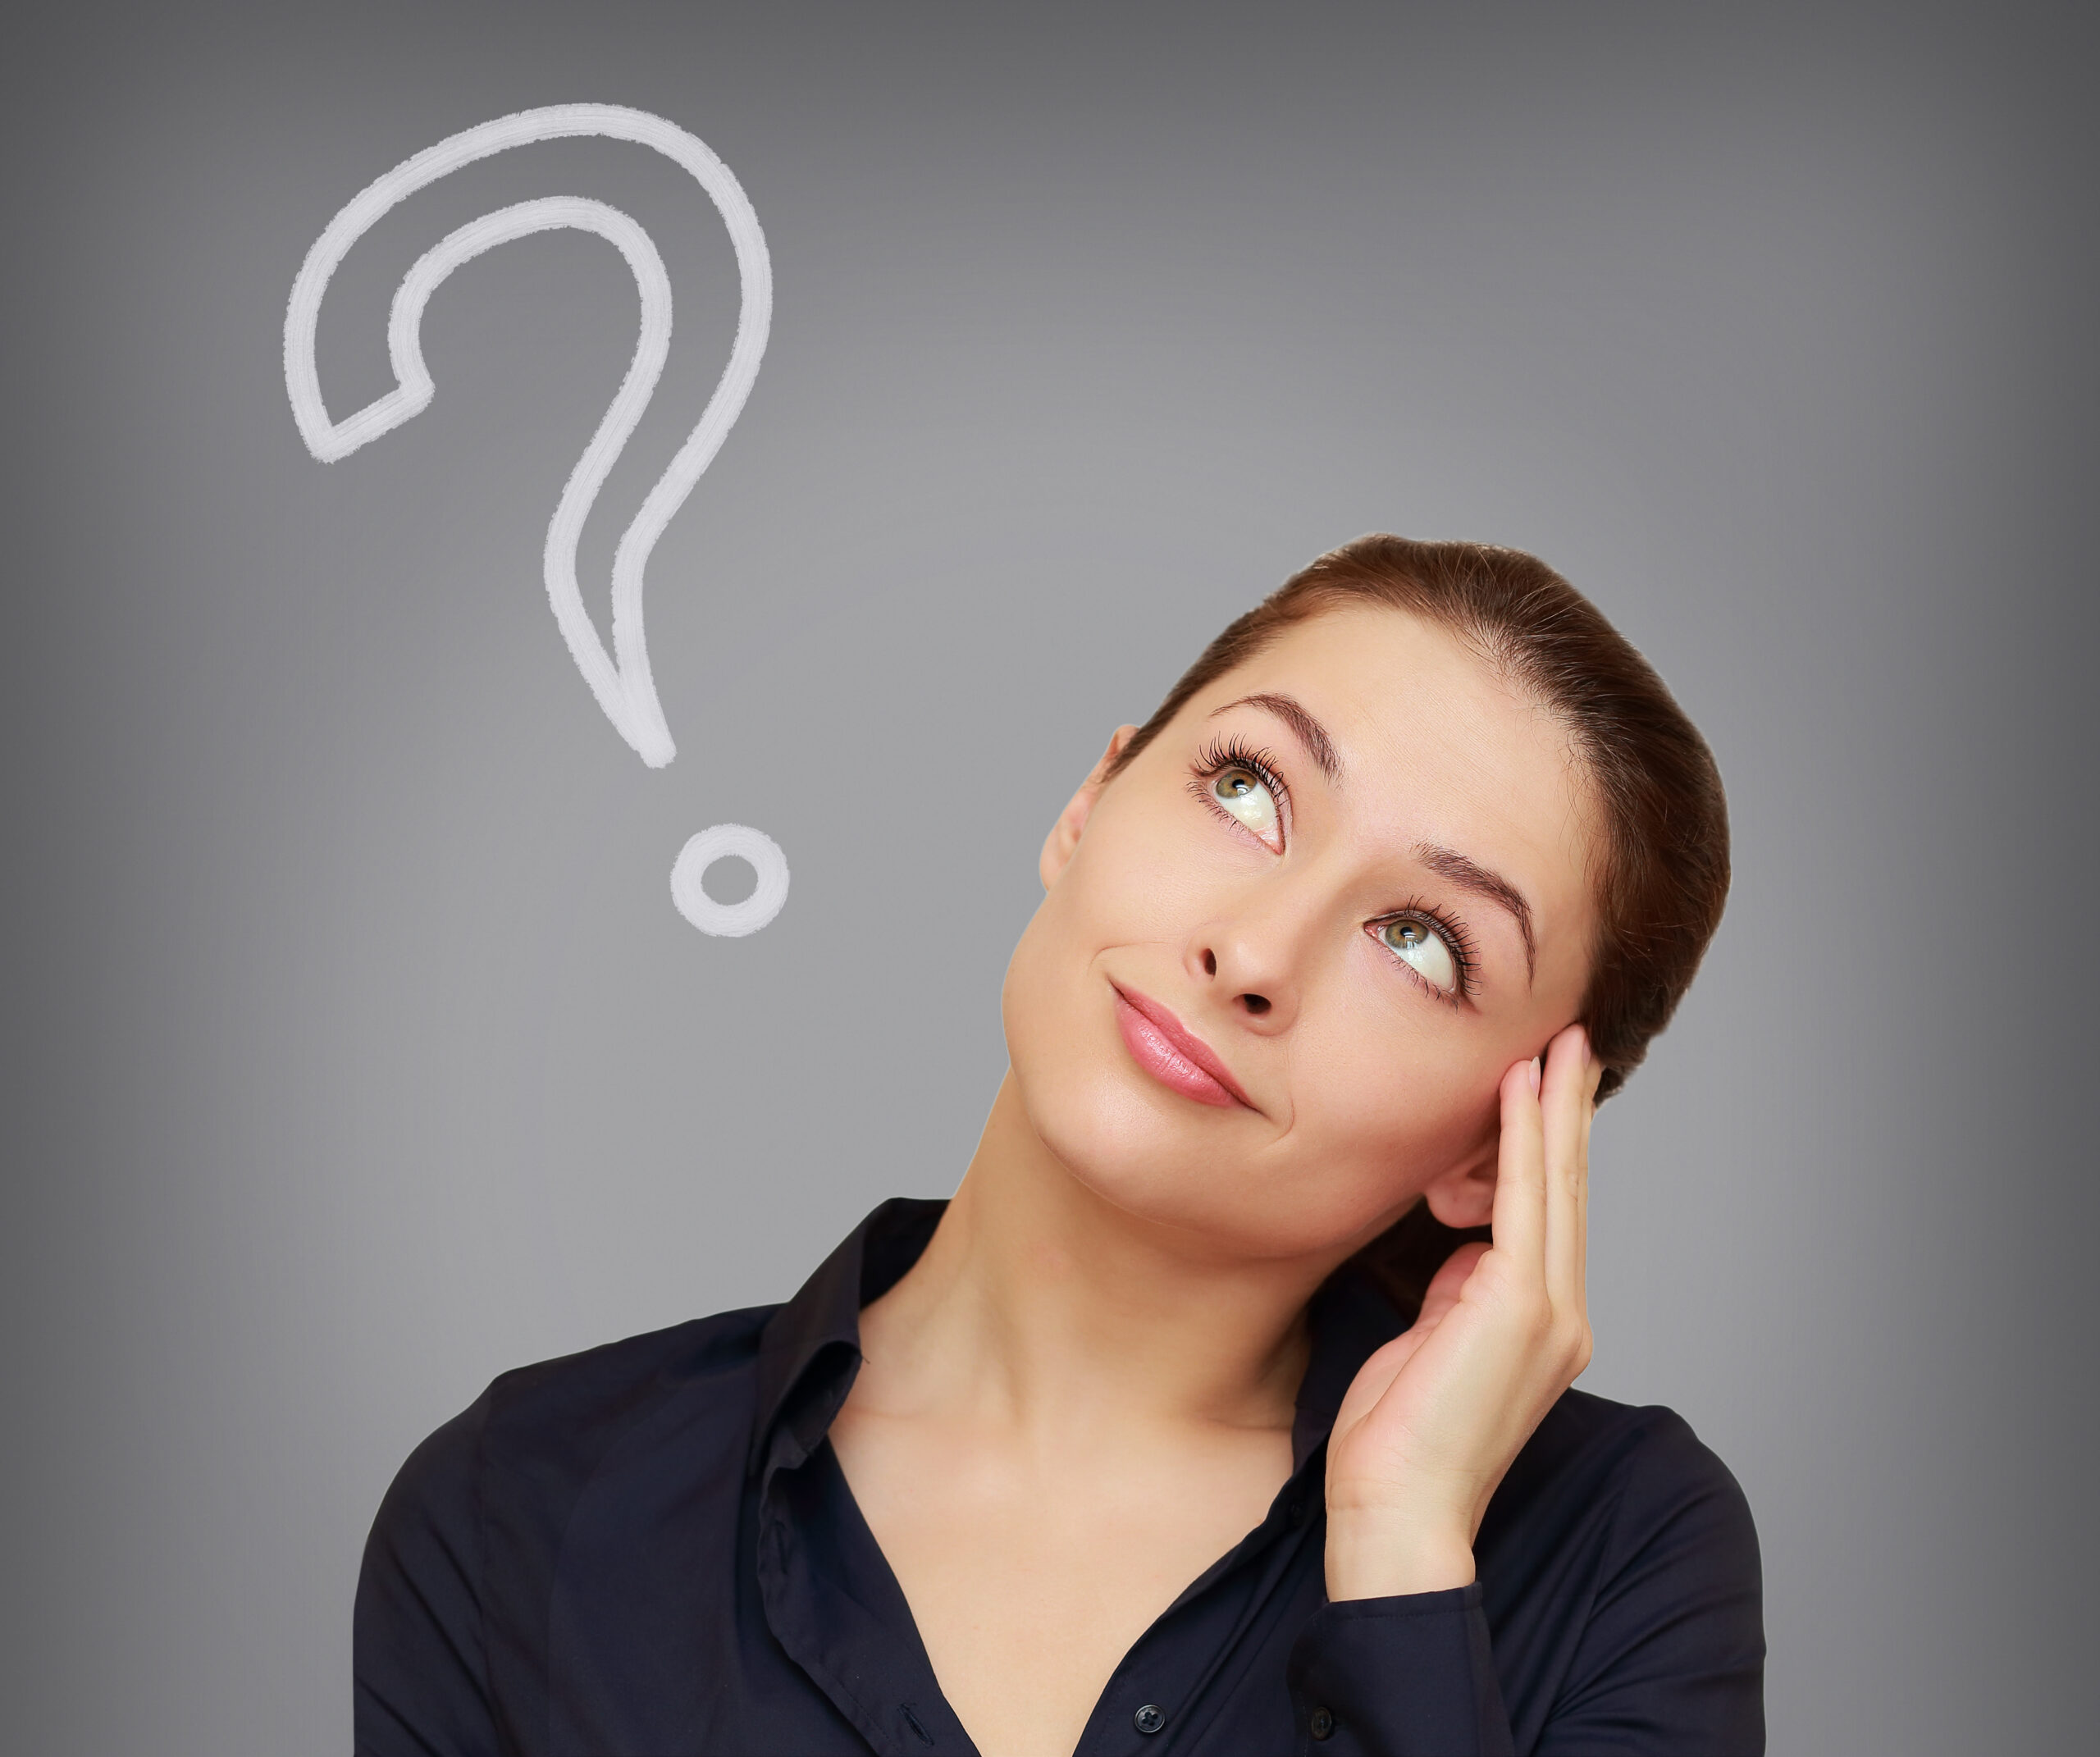 A woman with a questioning expression seeks tips, as depicted by the visual question mark.